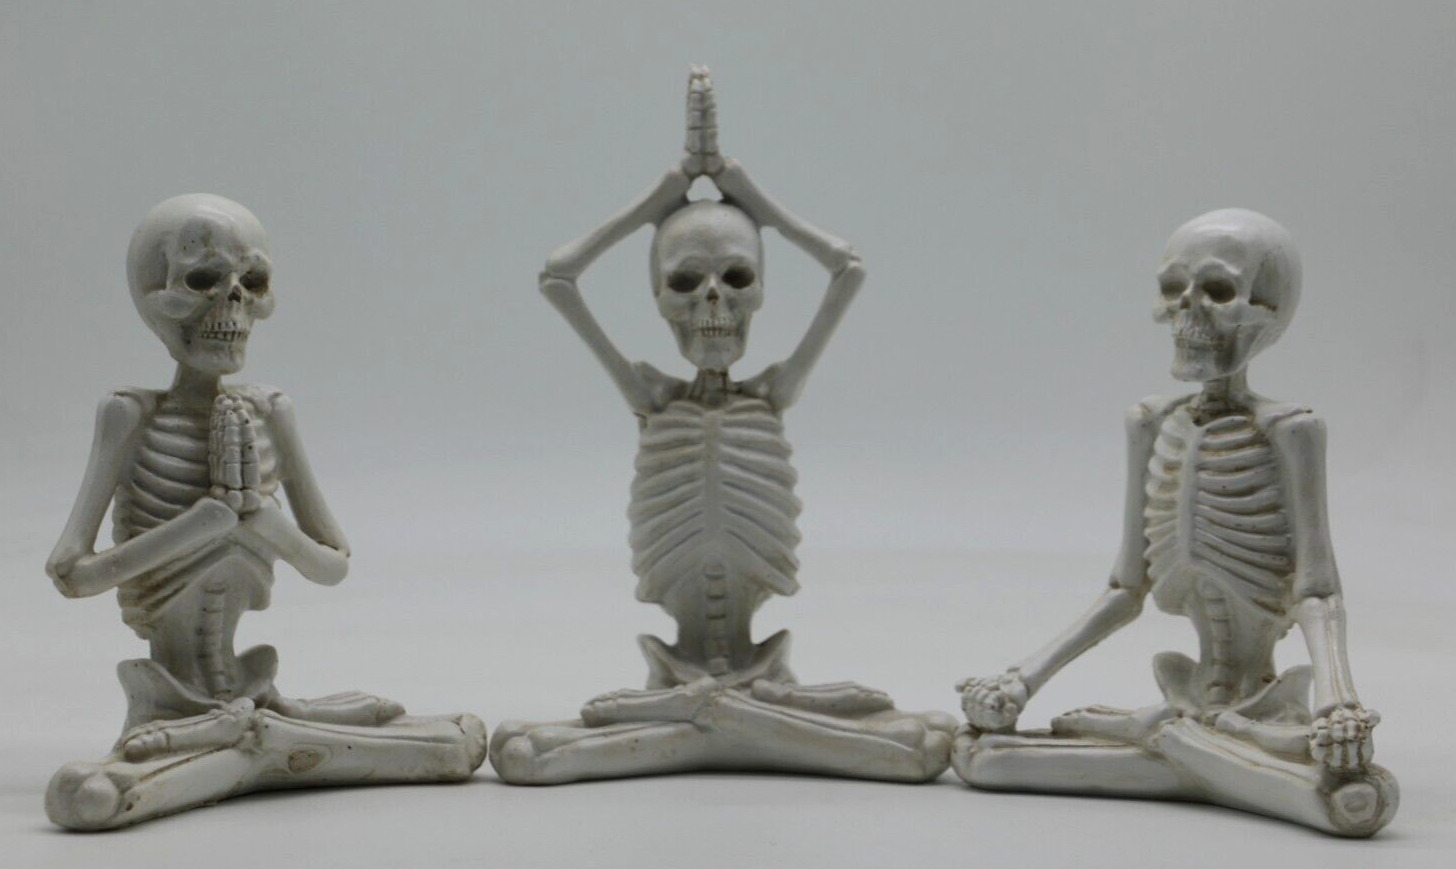 Pacific Giftware PT Yoga Skeletons Statues Set of 3